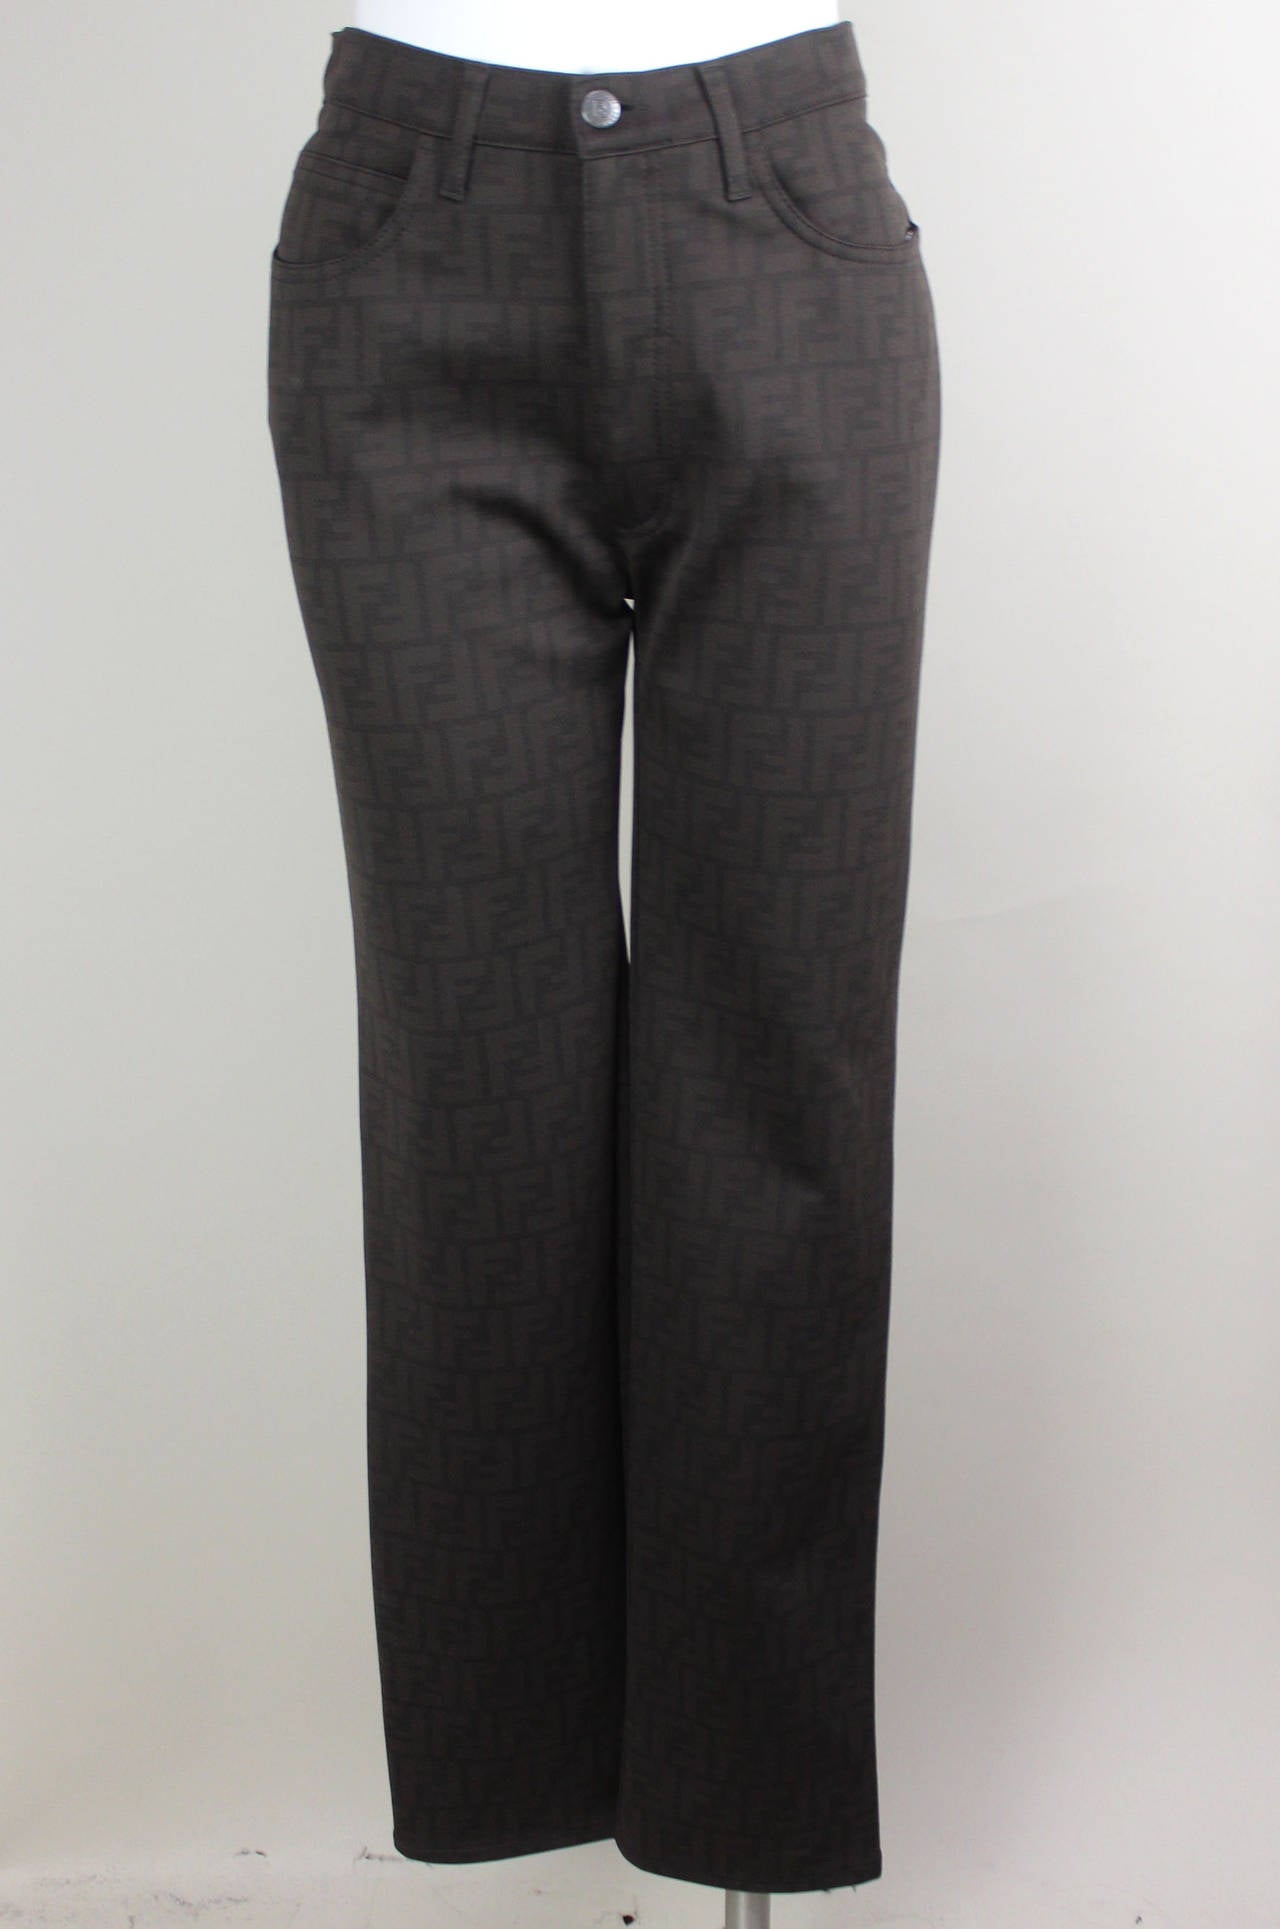 These are a classic jean style pant with a twist. They are covered in a suble overall print of the Fendi logo. The logo also appears on a patch on the back waistband.